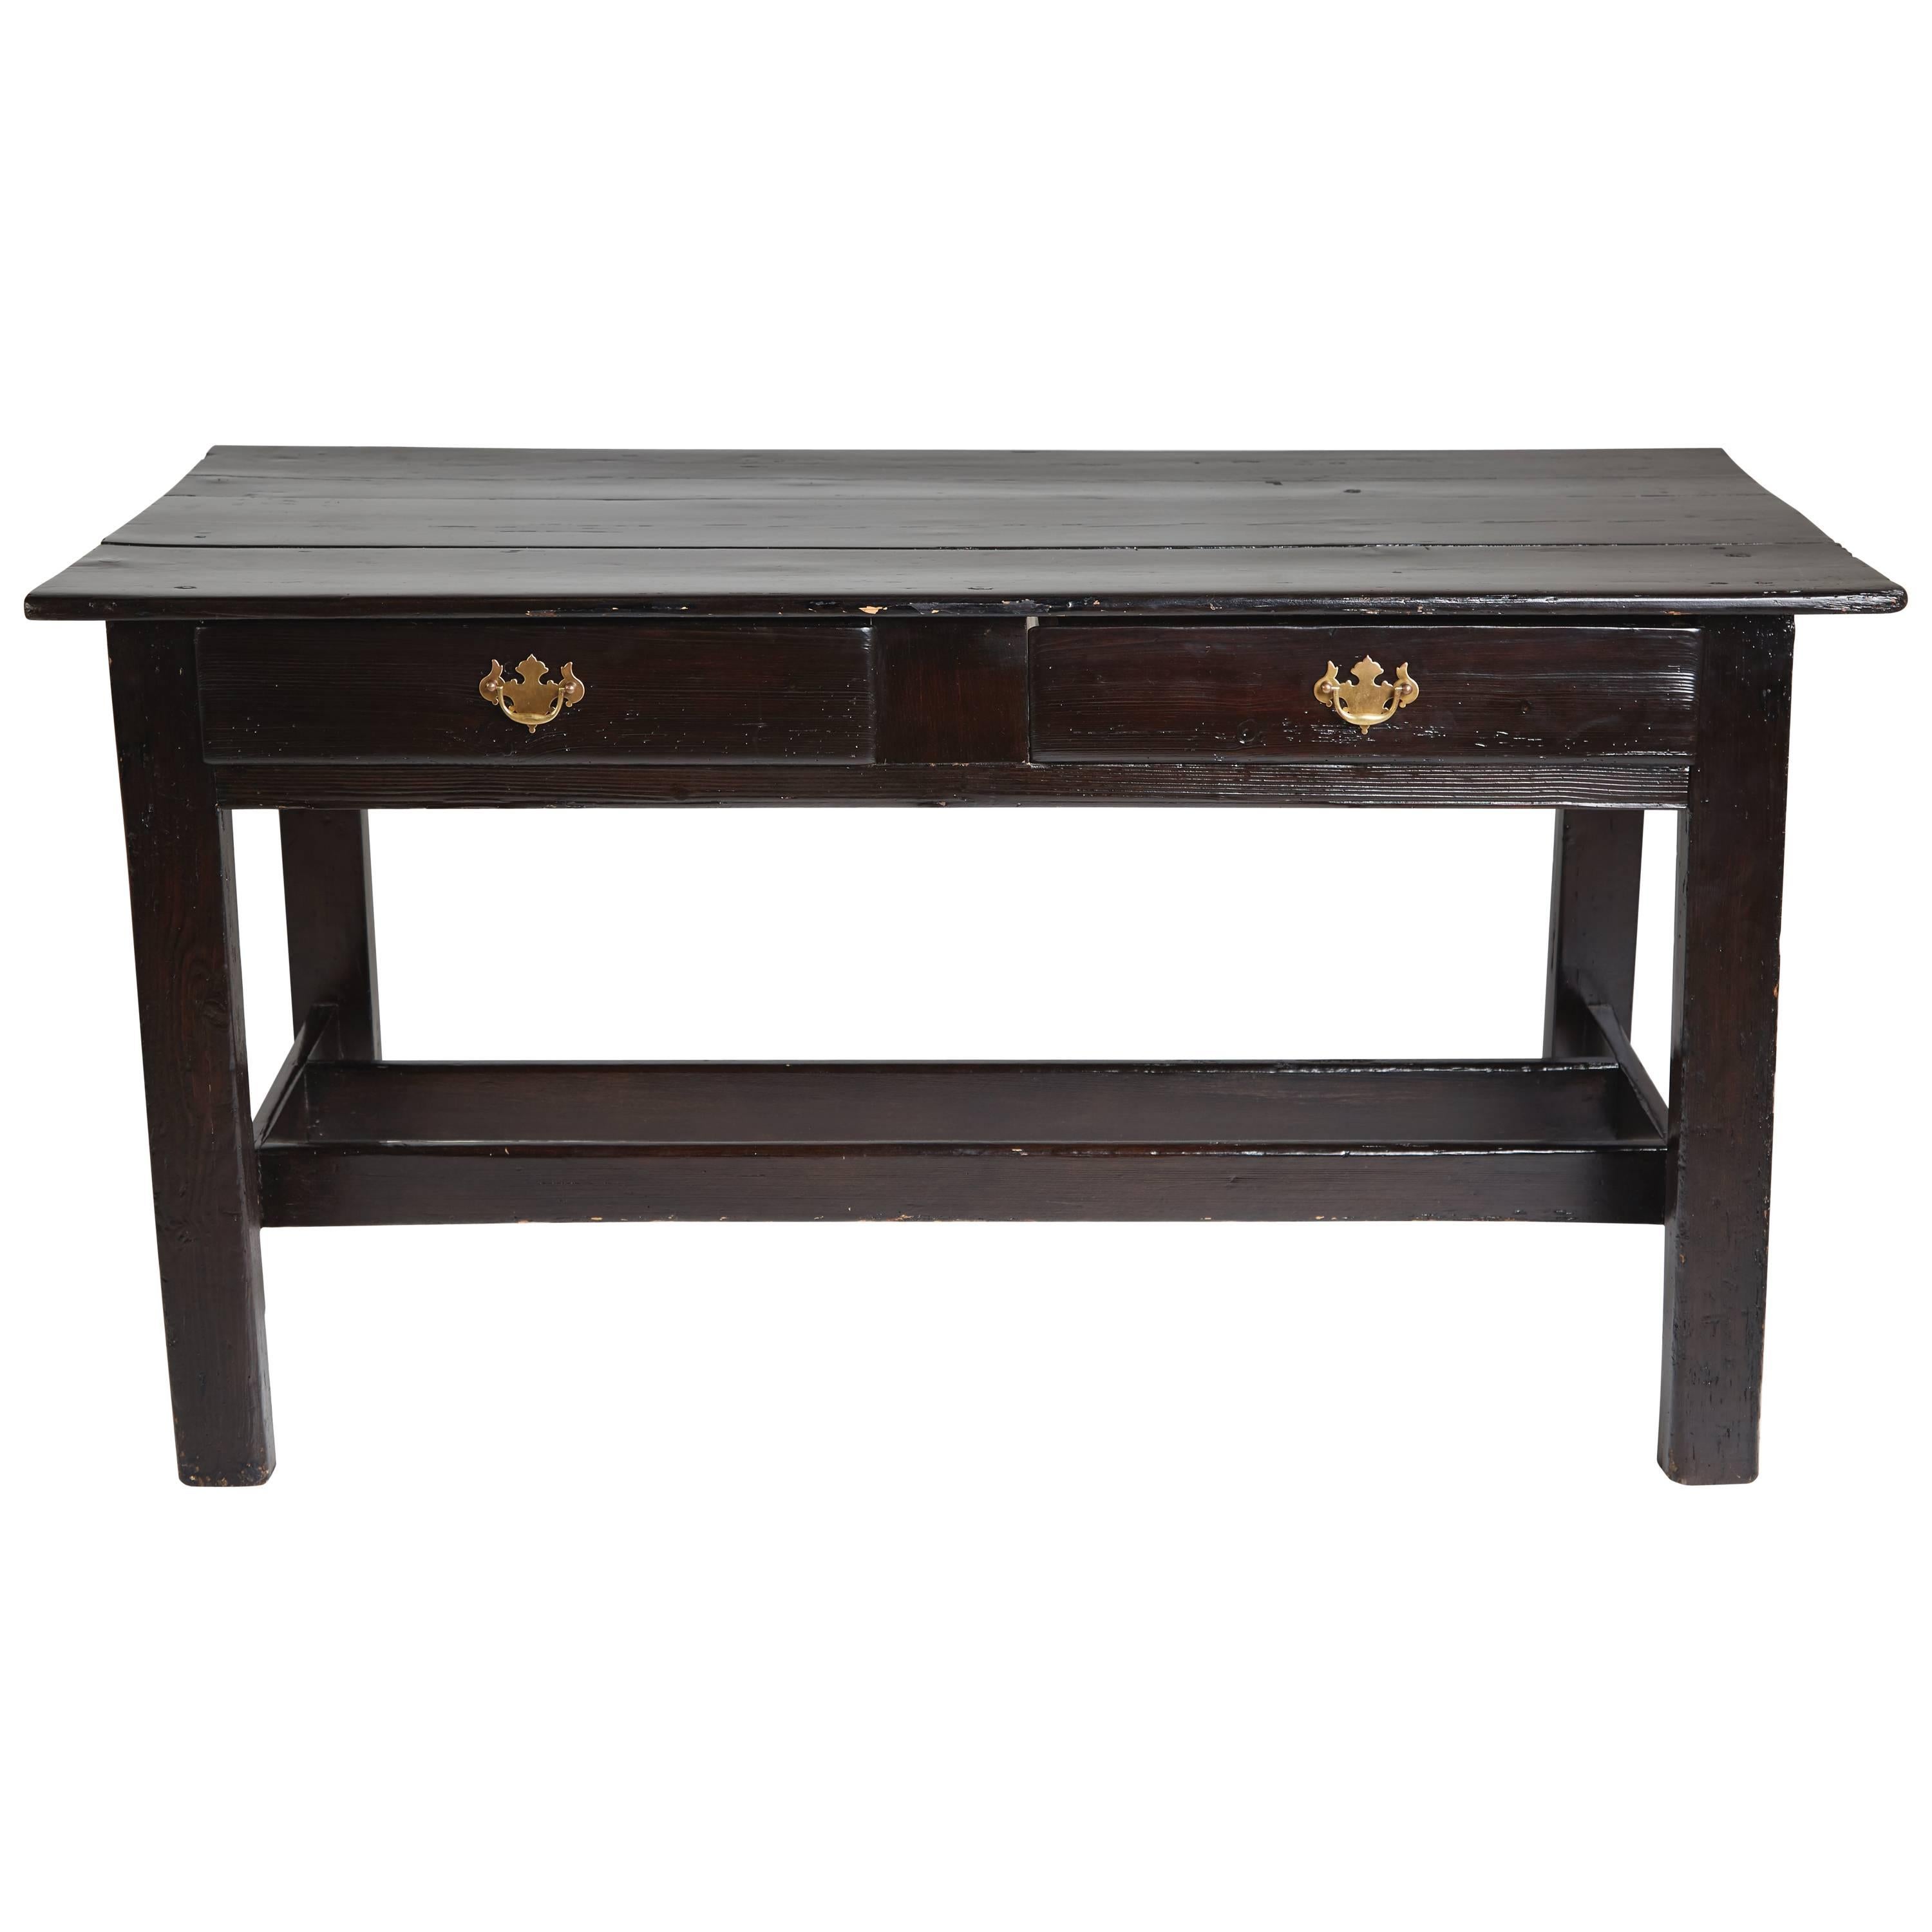 Vintage Black Lacquered Wooden Desk with Brass Hardware